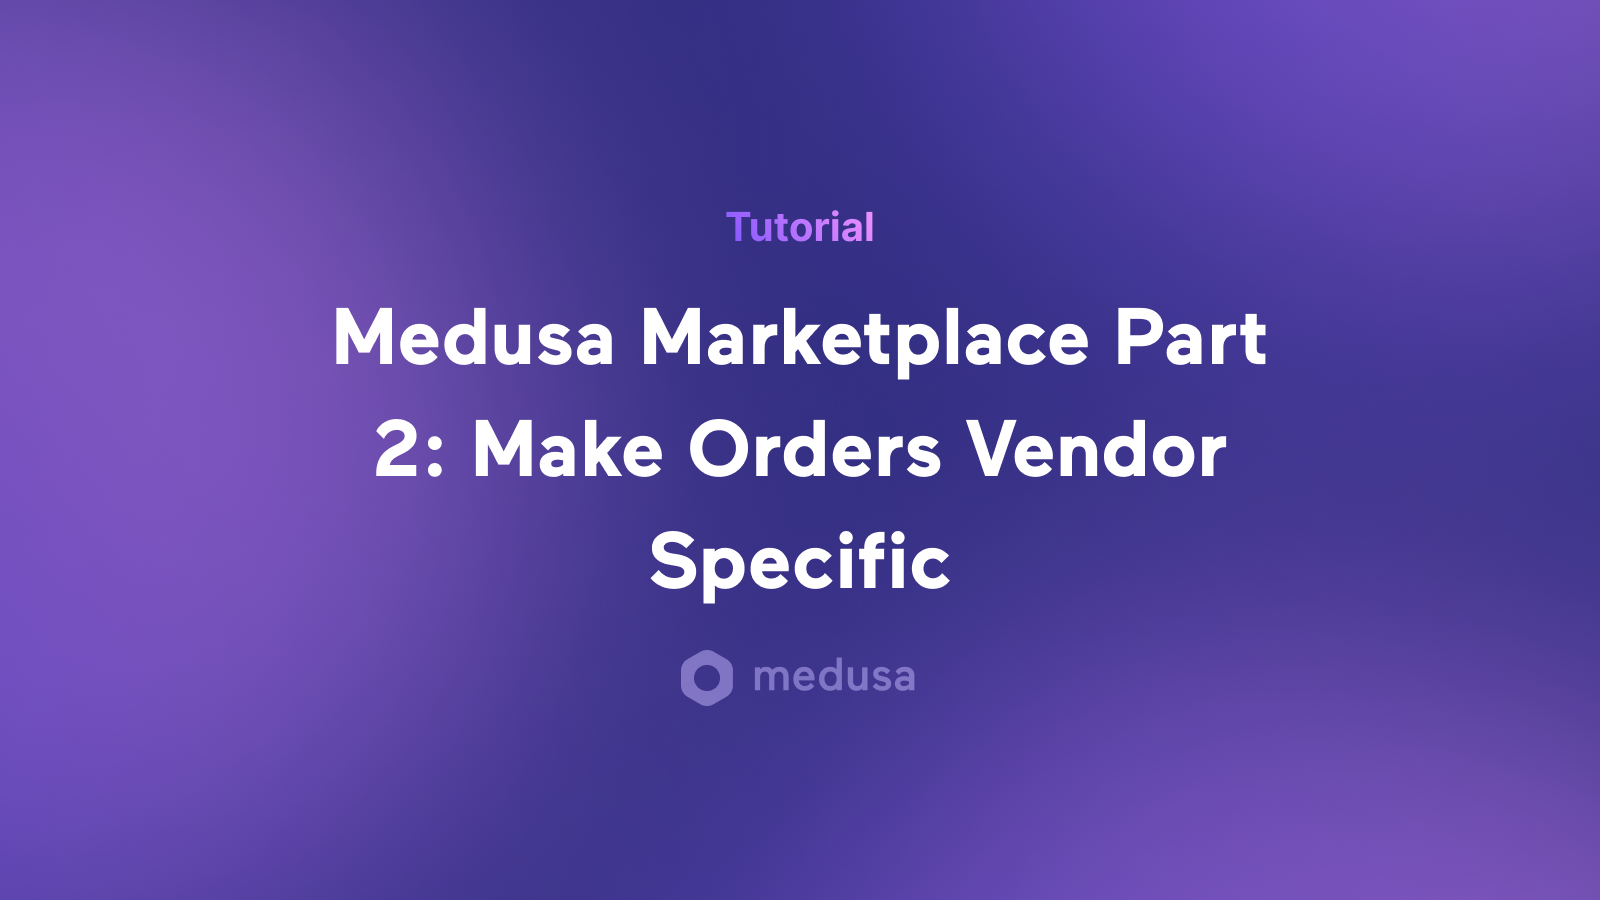 In this part, you’ll learn how to link orders to their respective stores in a marketplace.